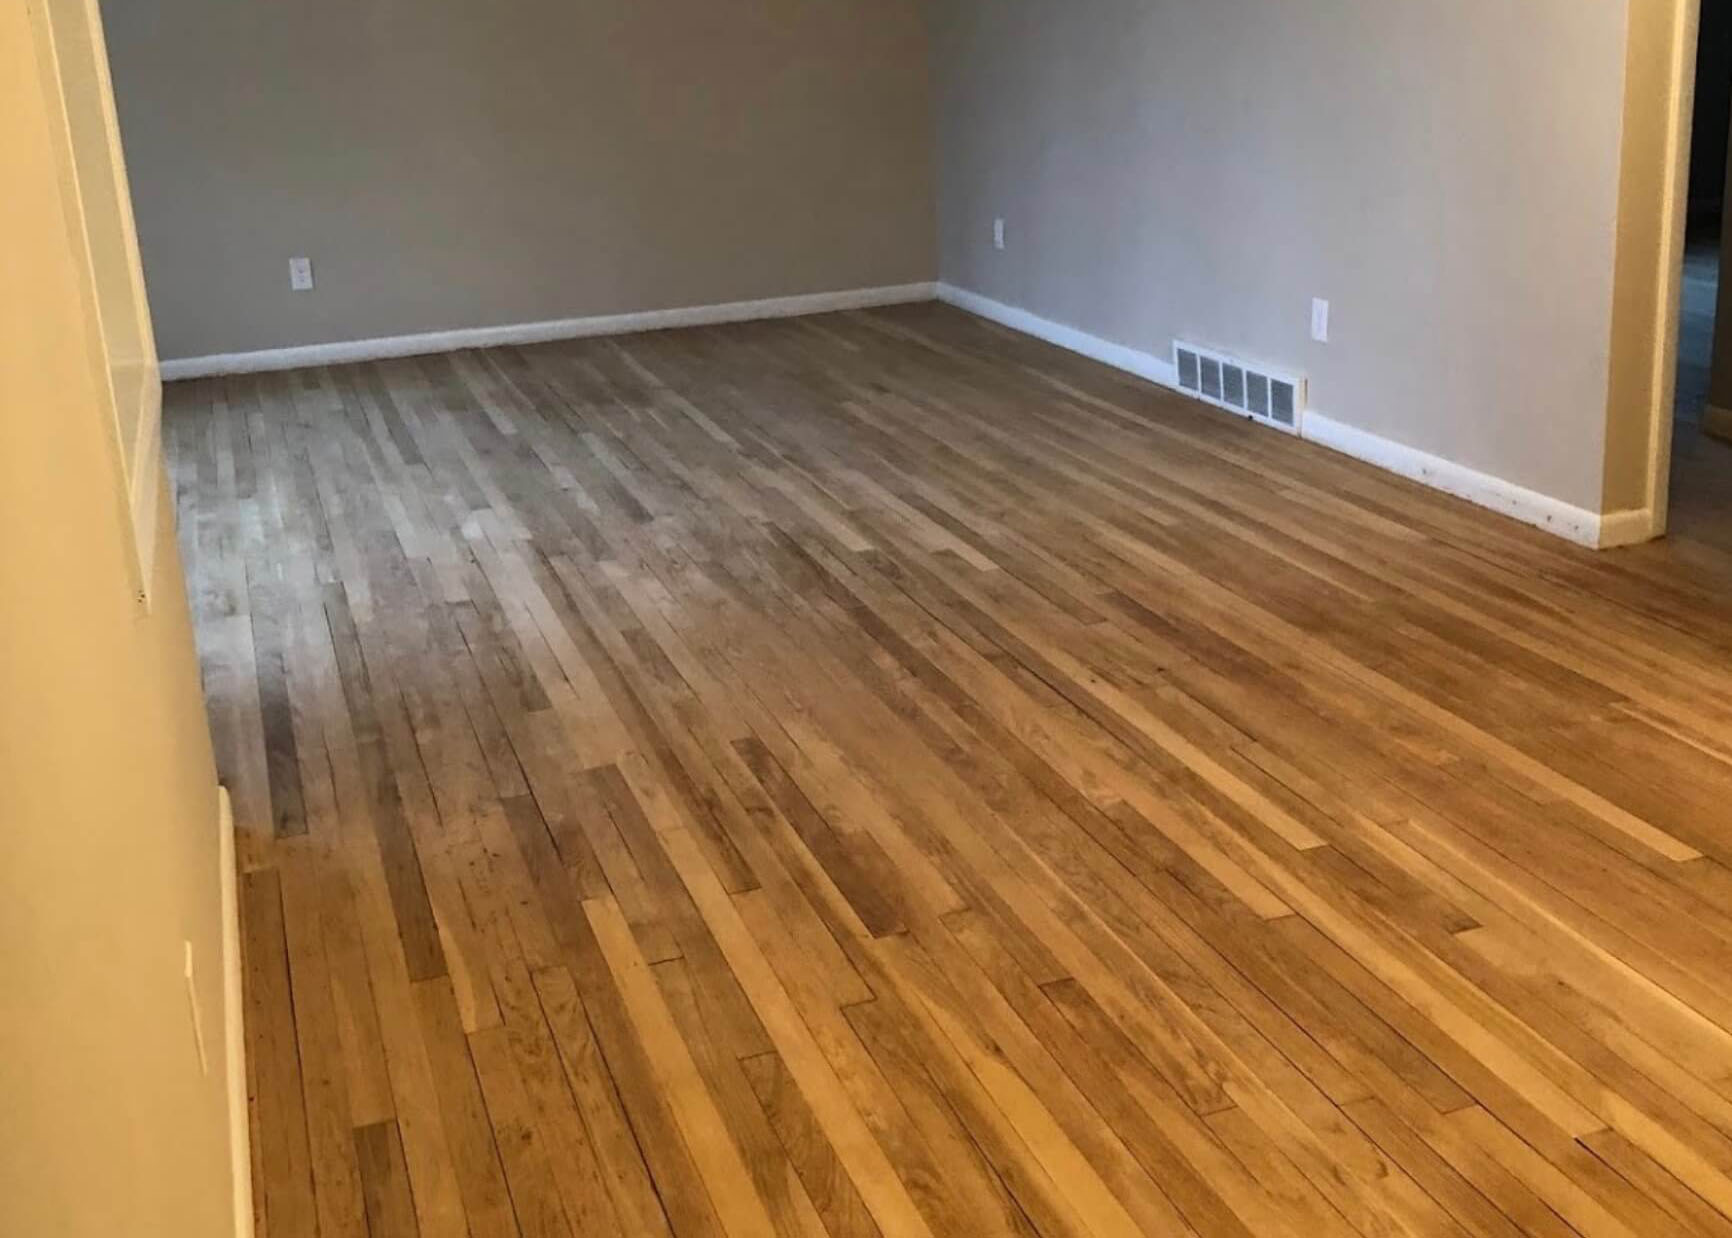 a floor in need of a new finish